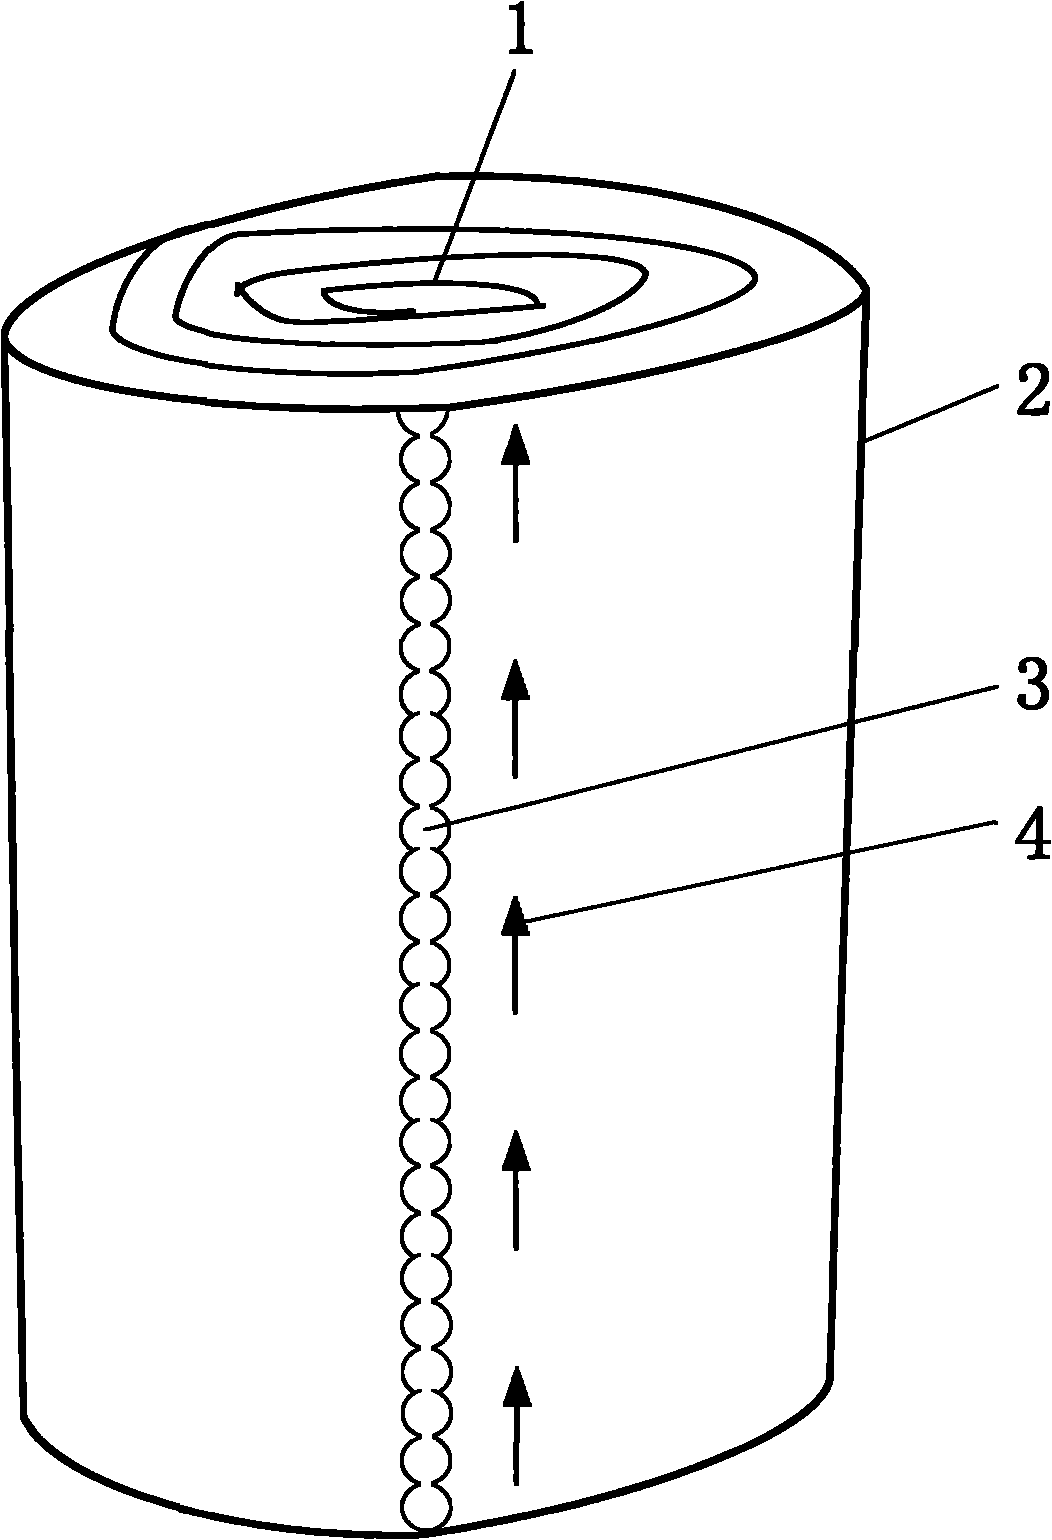 Packaging structure of self-adhered elastic bandage